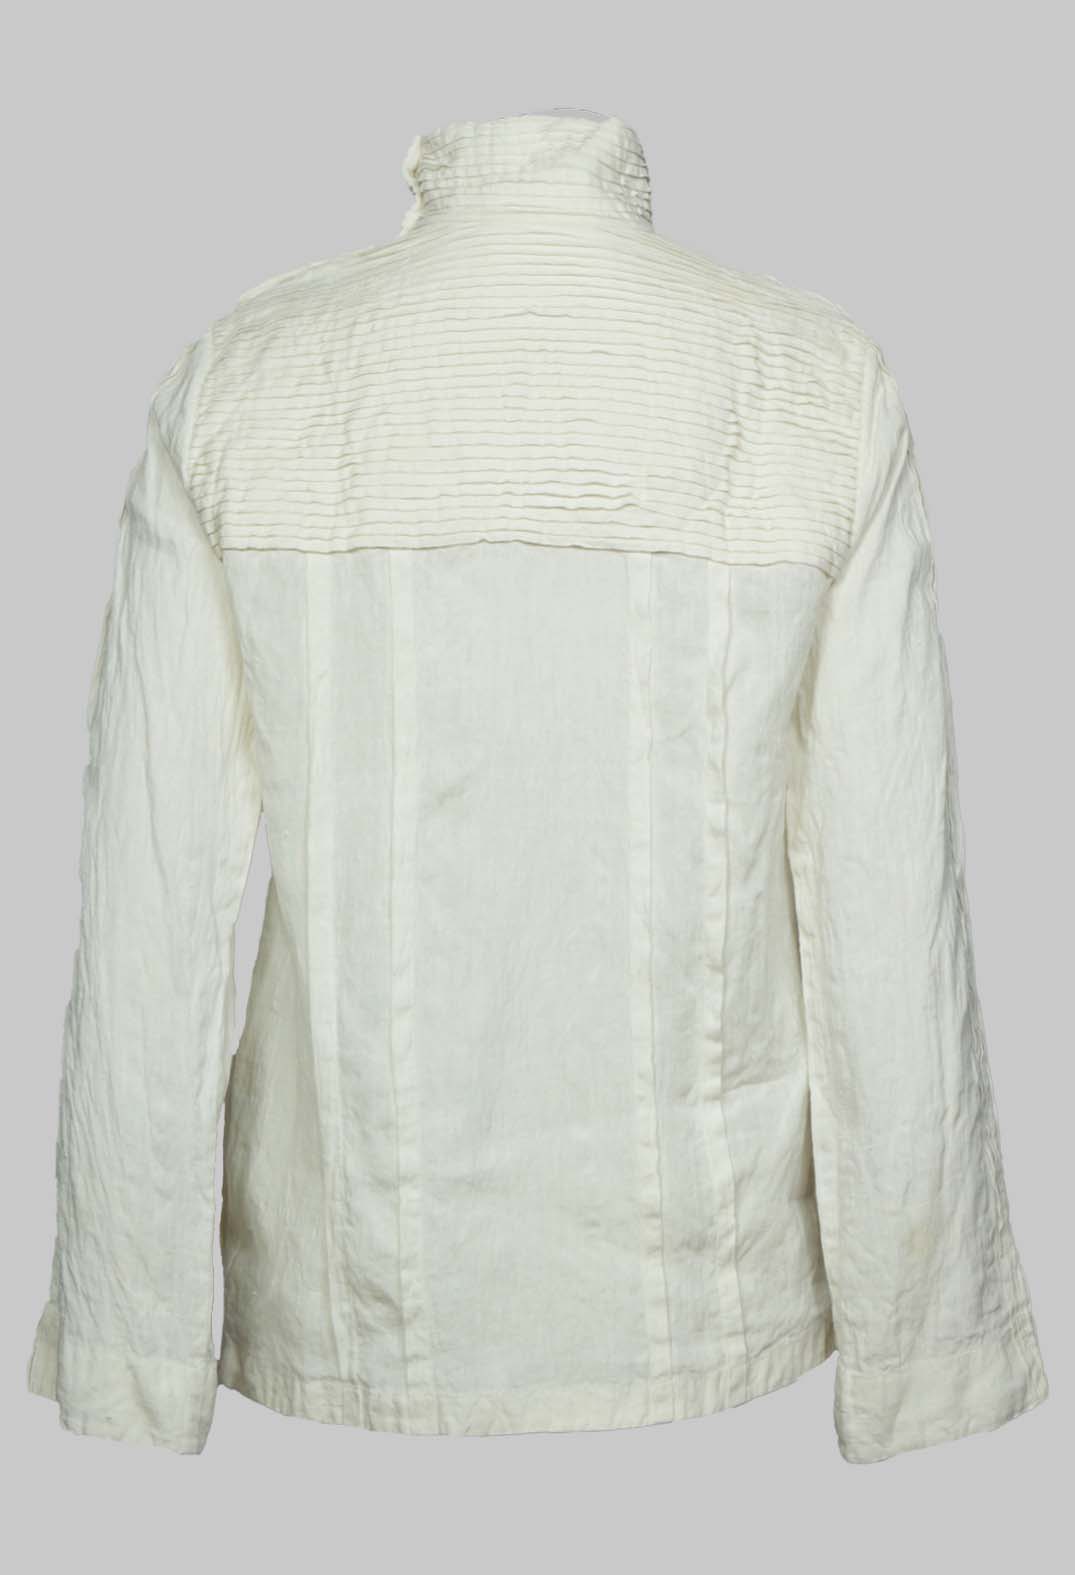 Cary Pleated Shirt in Cream